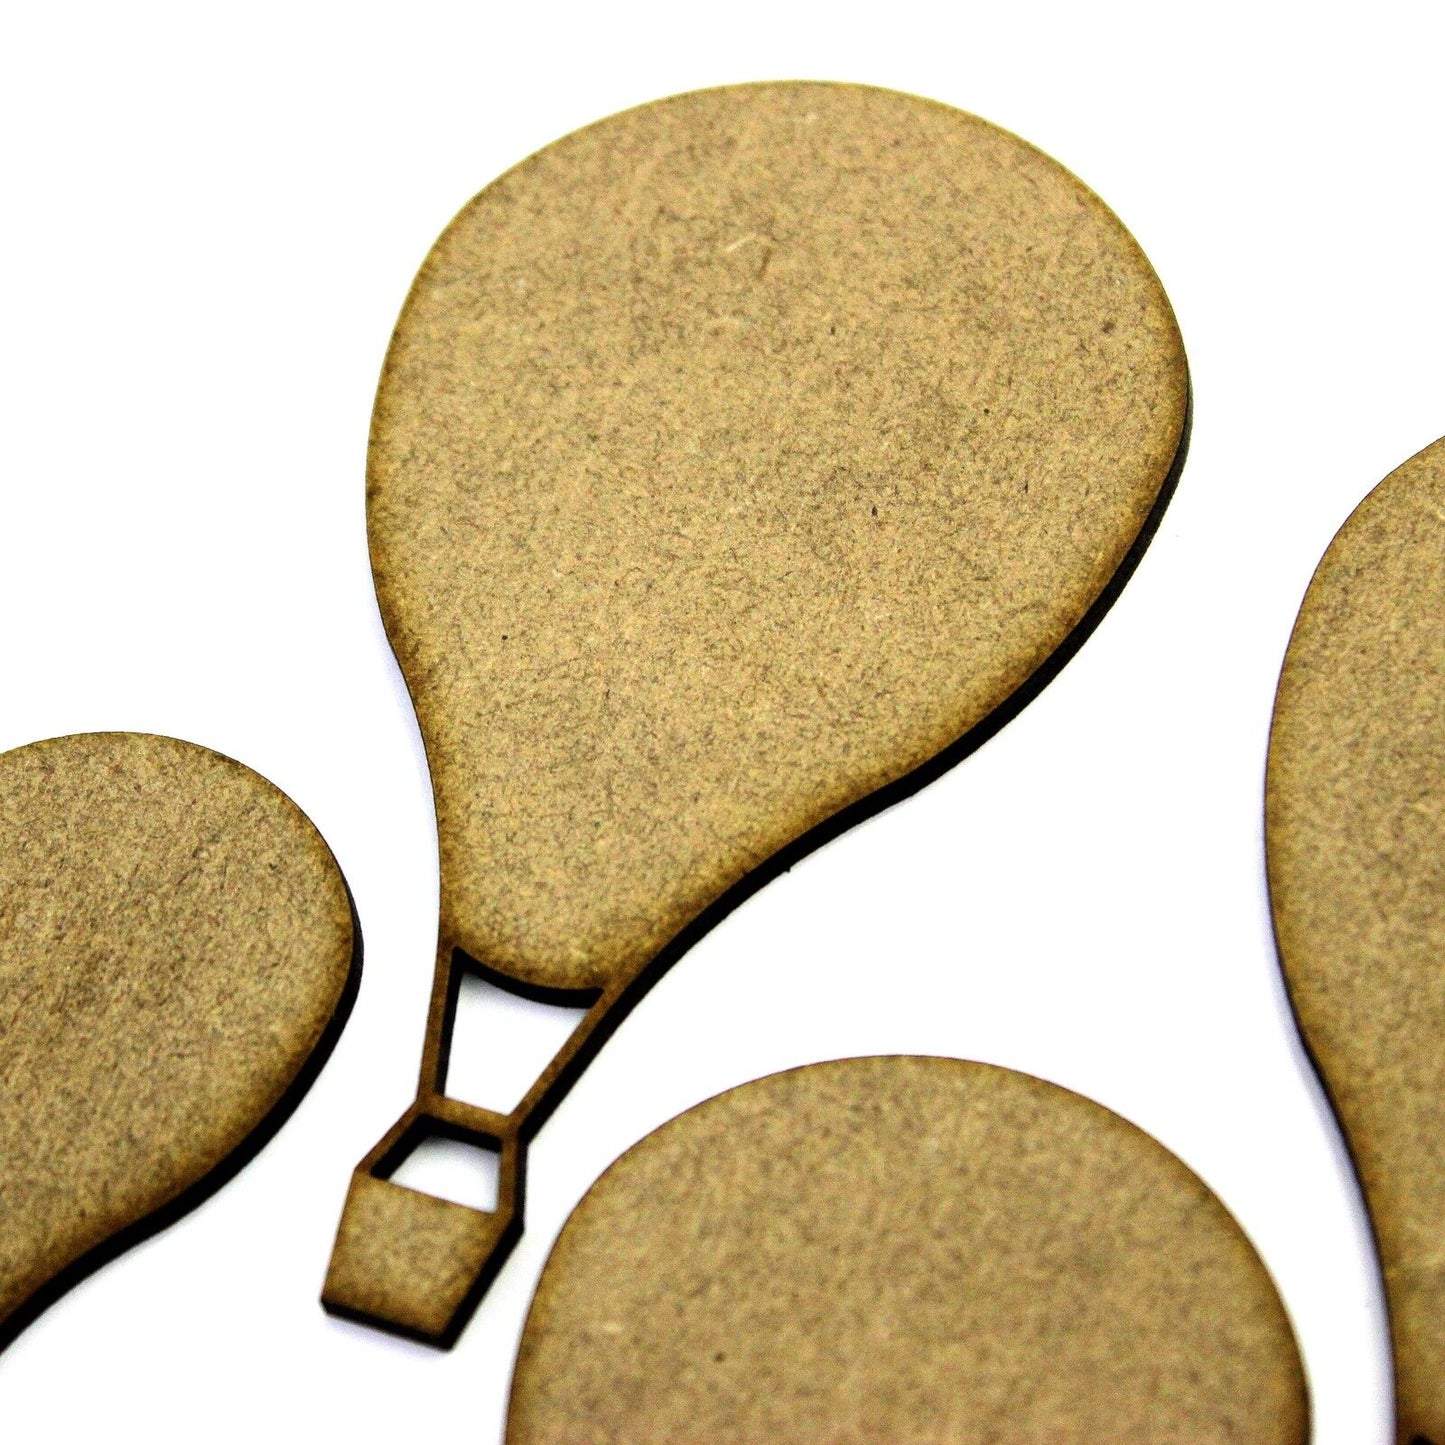 Air Balloon Craft Shapes. Various Sizes 20mm - 200mm. 2mm MDF Wood Laser Cut